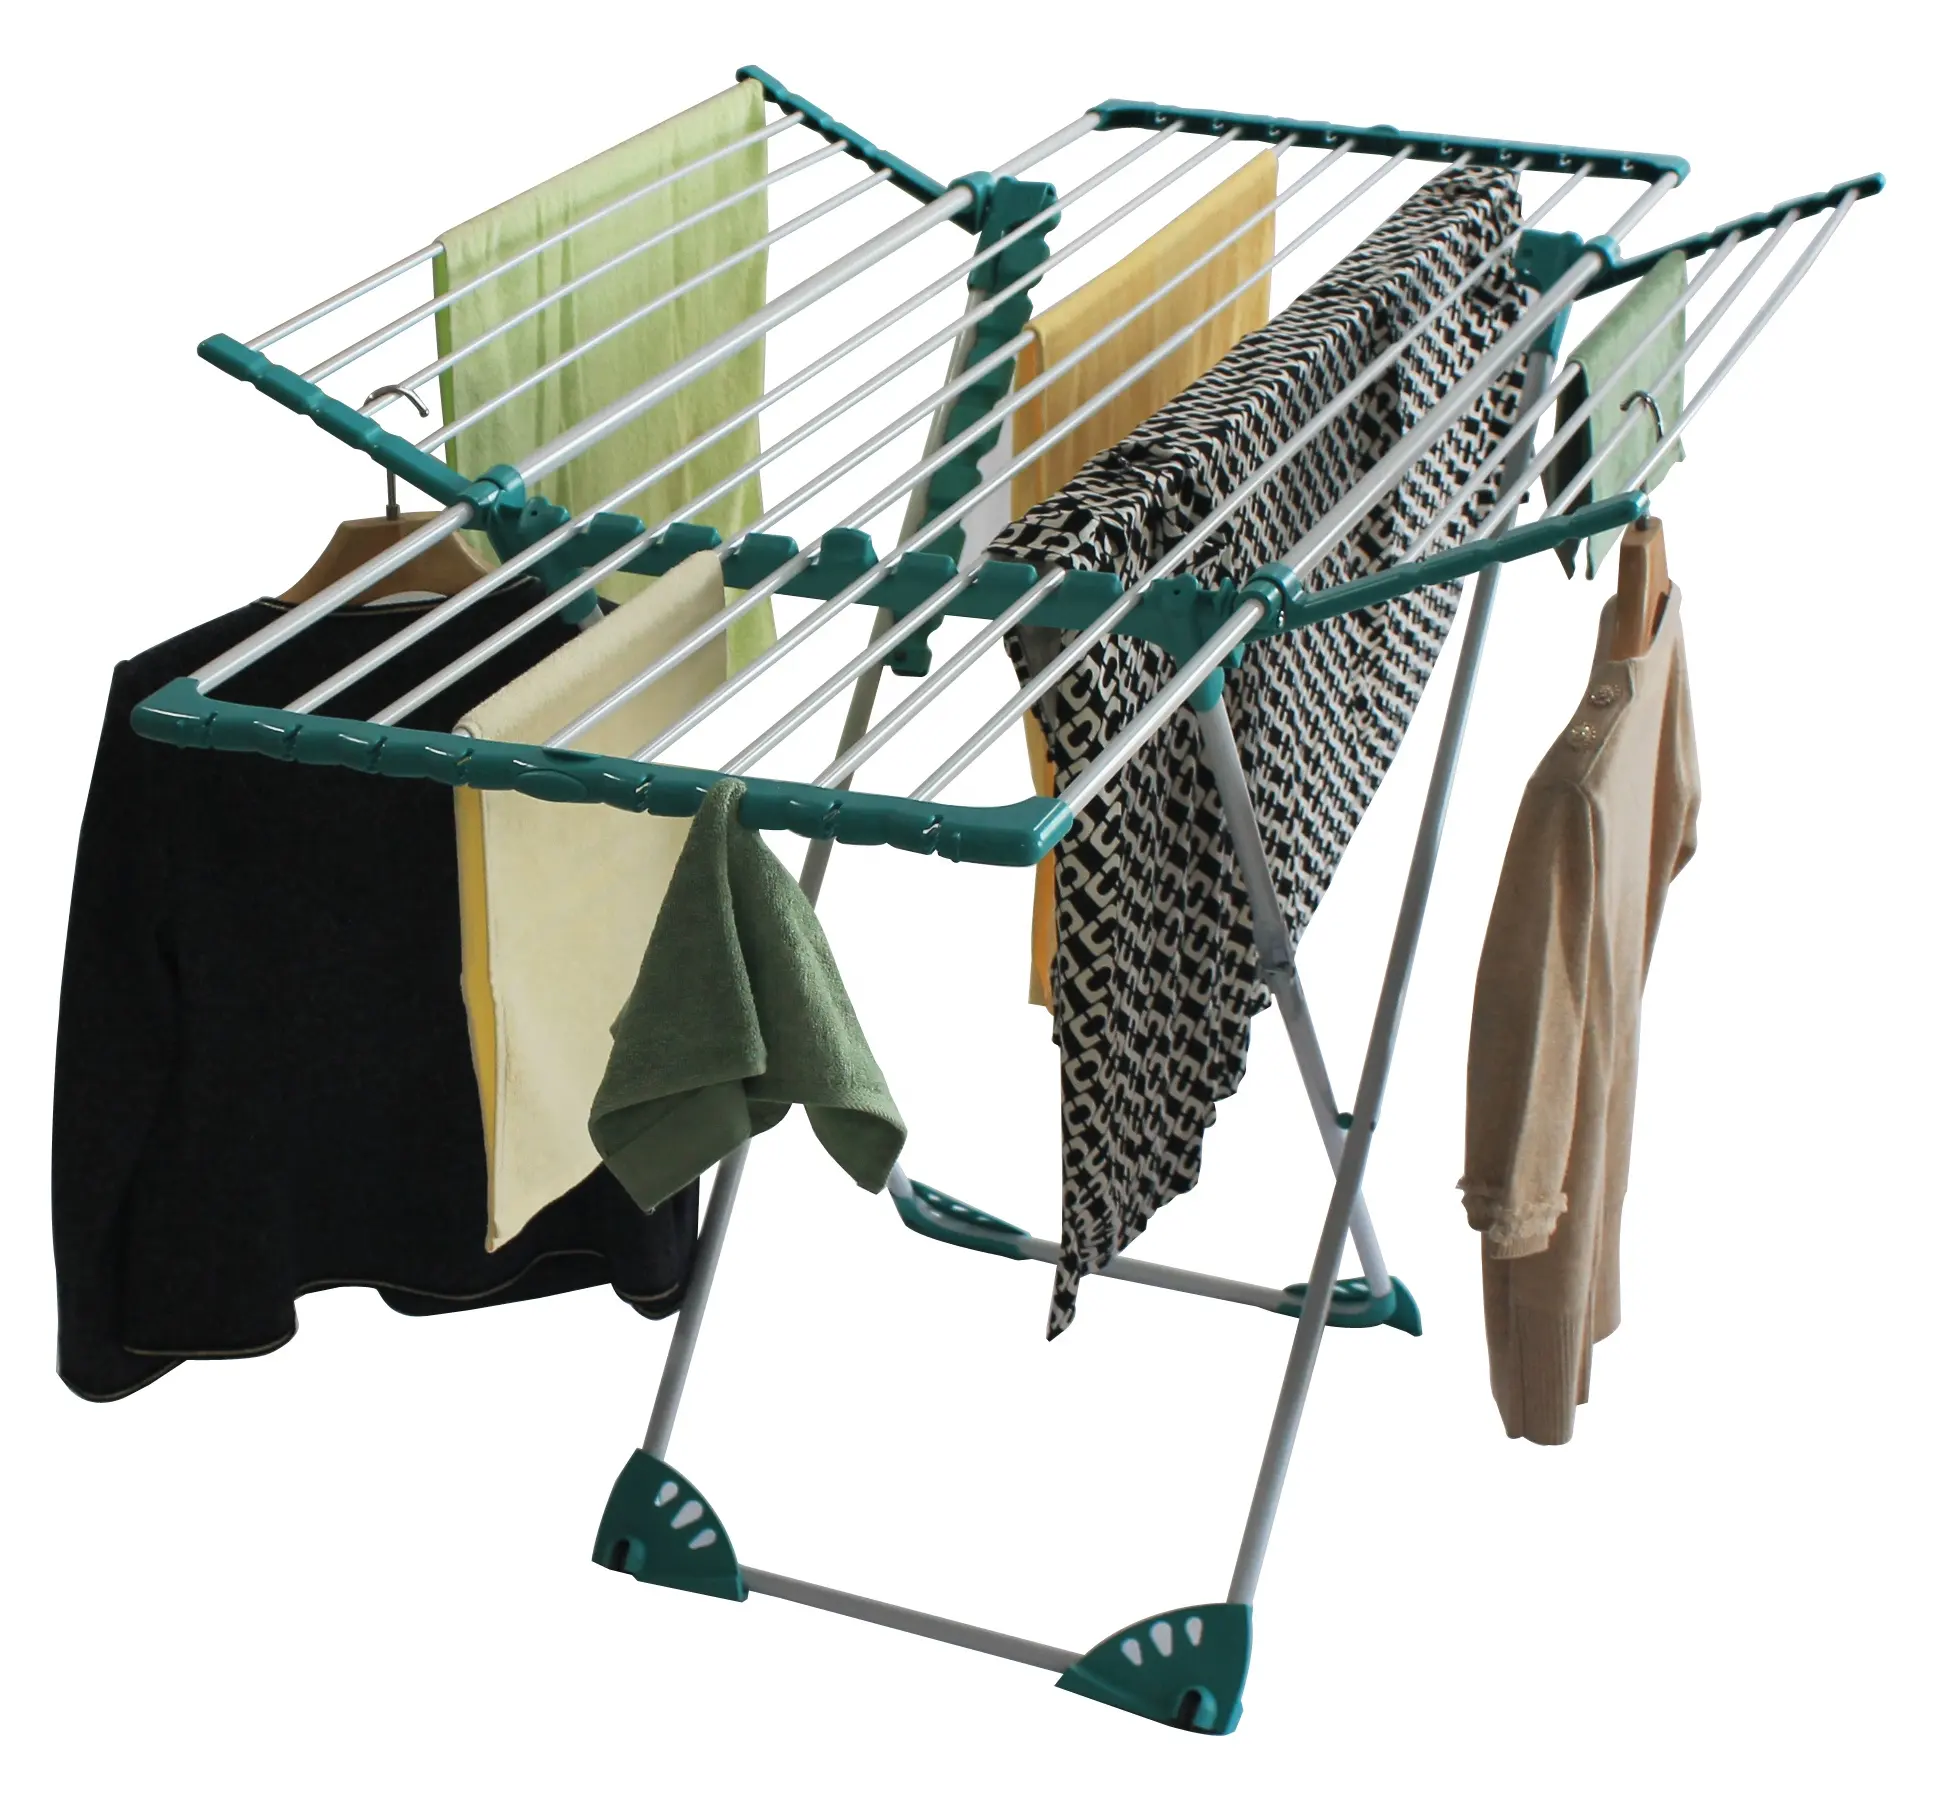 27M Big Laundry Space Deluxious Clothes Hanger Airer Dryer Rack Free Standing Clothesline